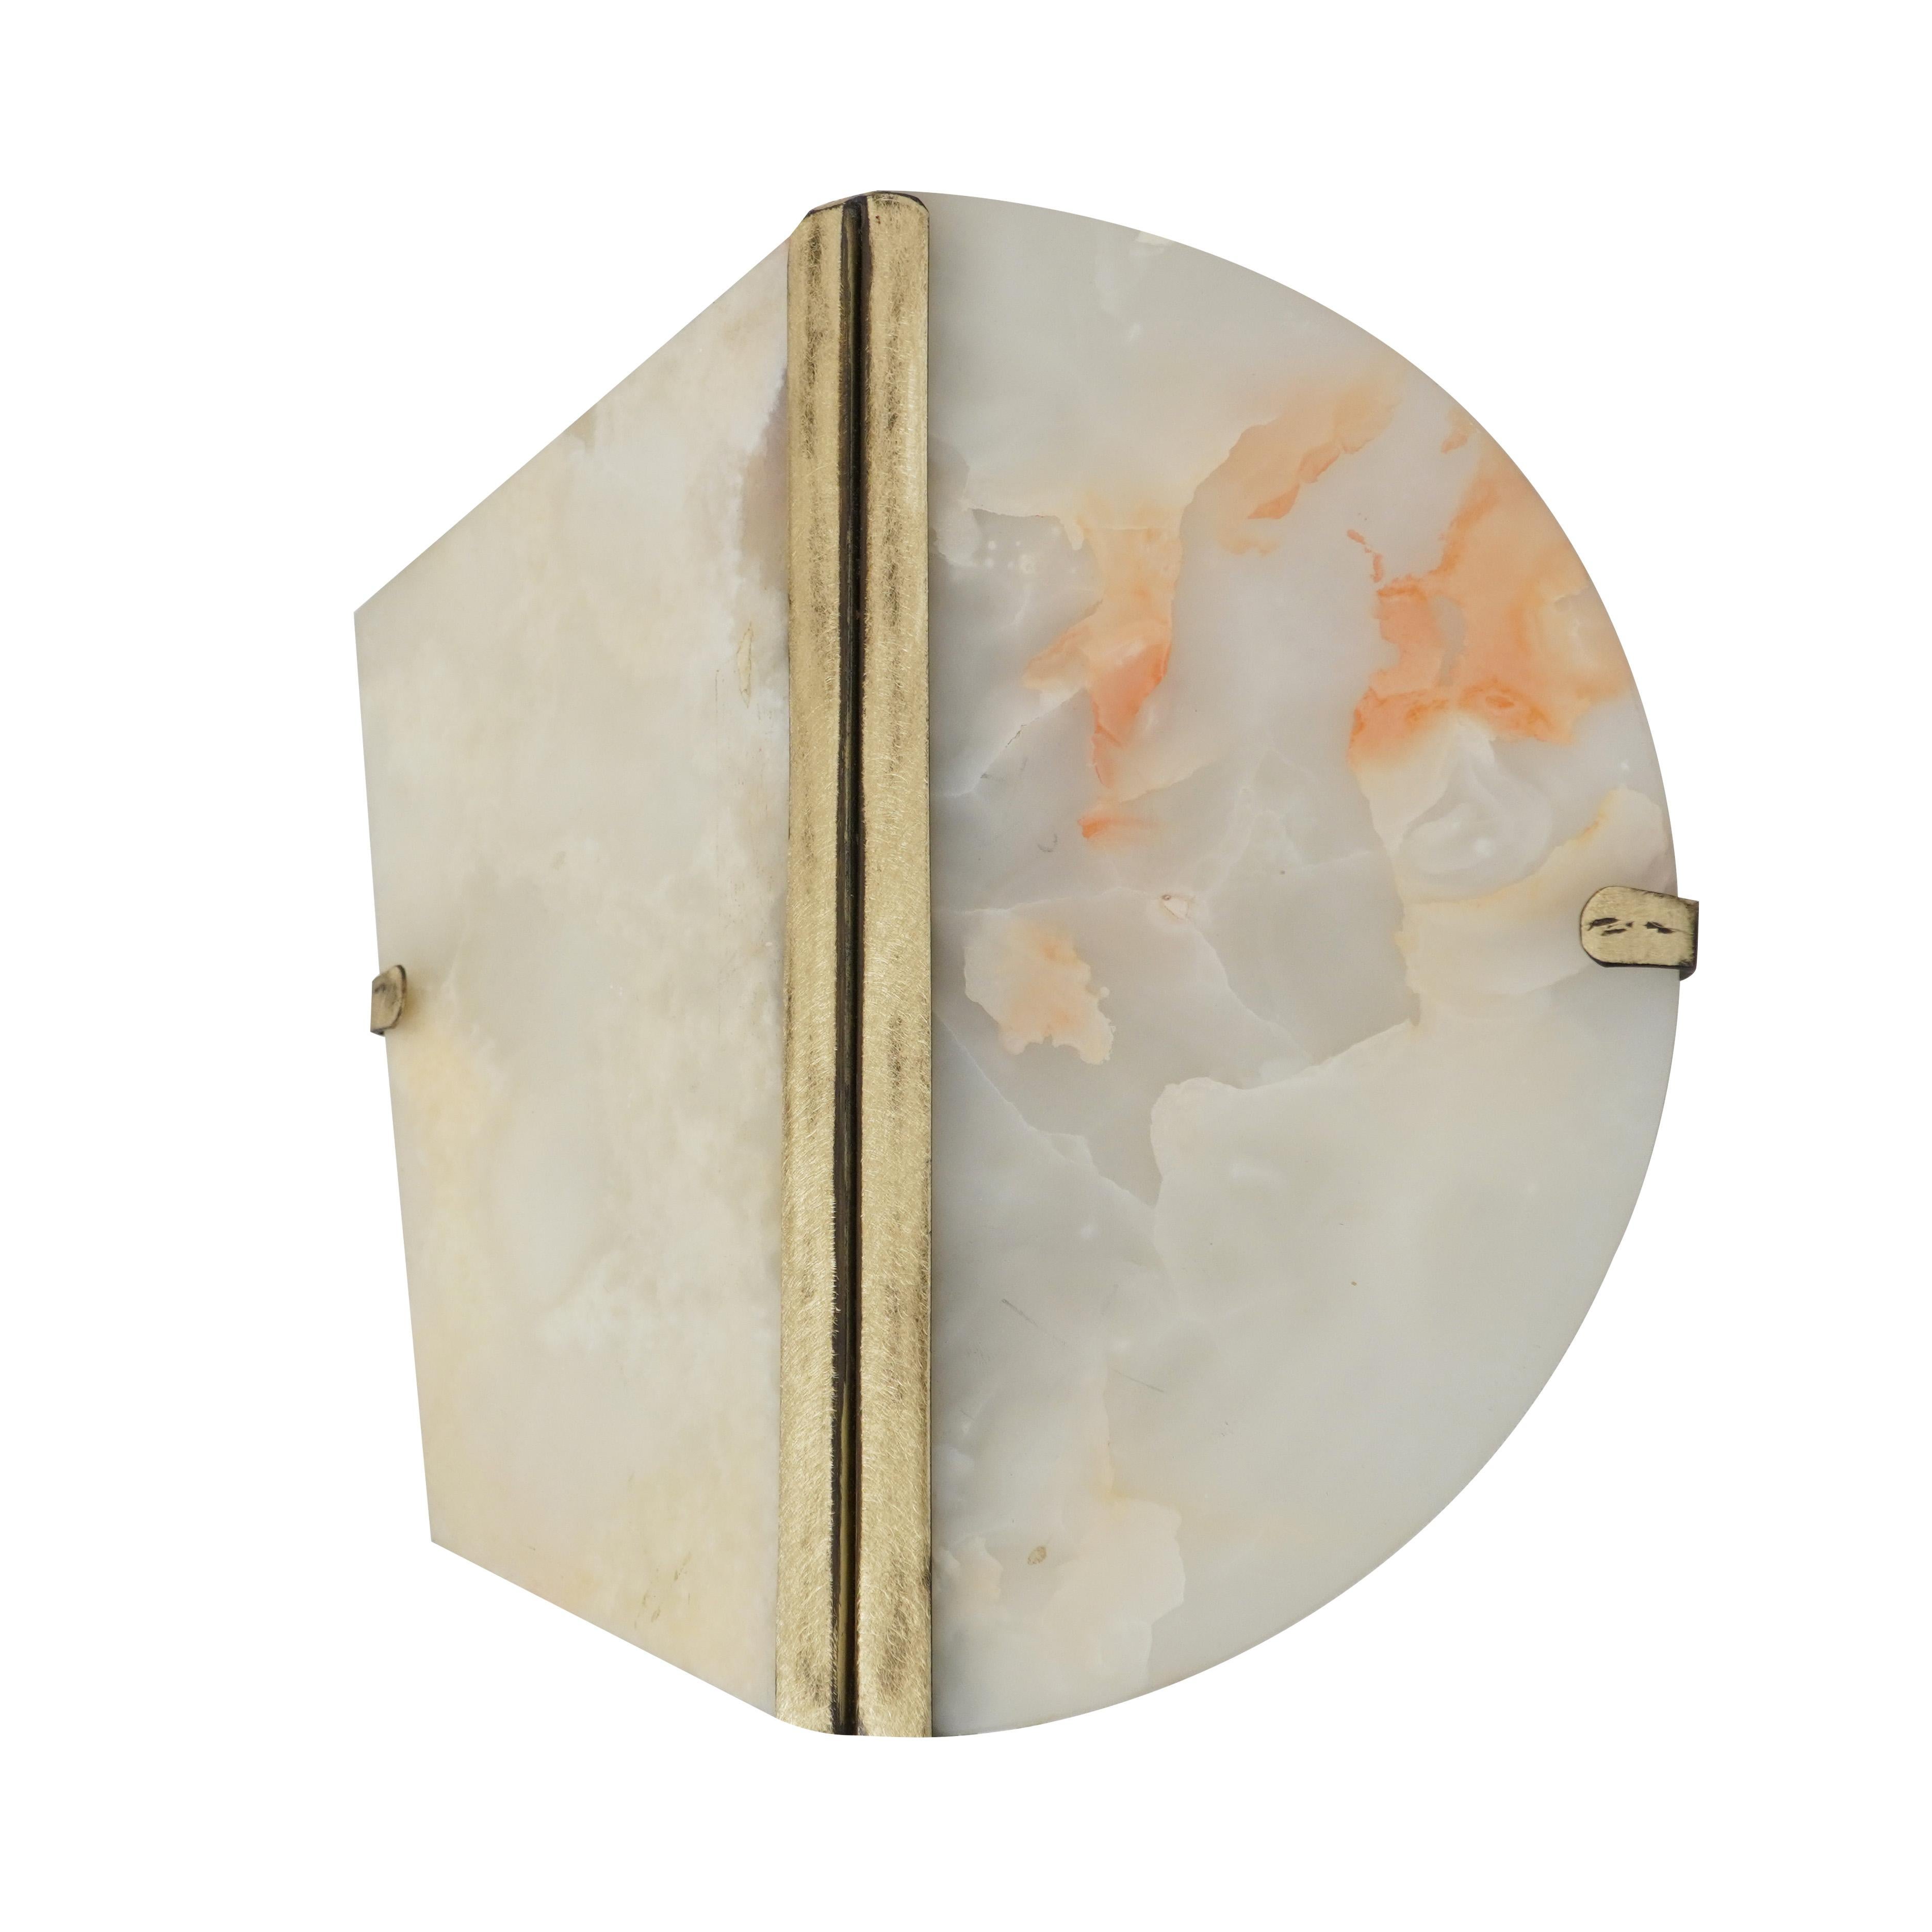 TWO-BE wall light onix stone

Entirely made in Tuscany, Italy.
This object is a -always beautiful– piece to décor interiors from Classic to Contemporary style.

The heart of Two-Be, designed by Sabrina Landini are made of polished brass, to